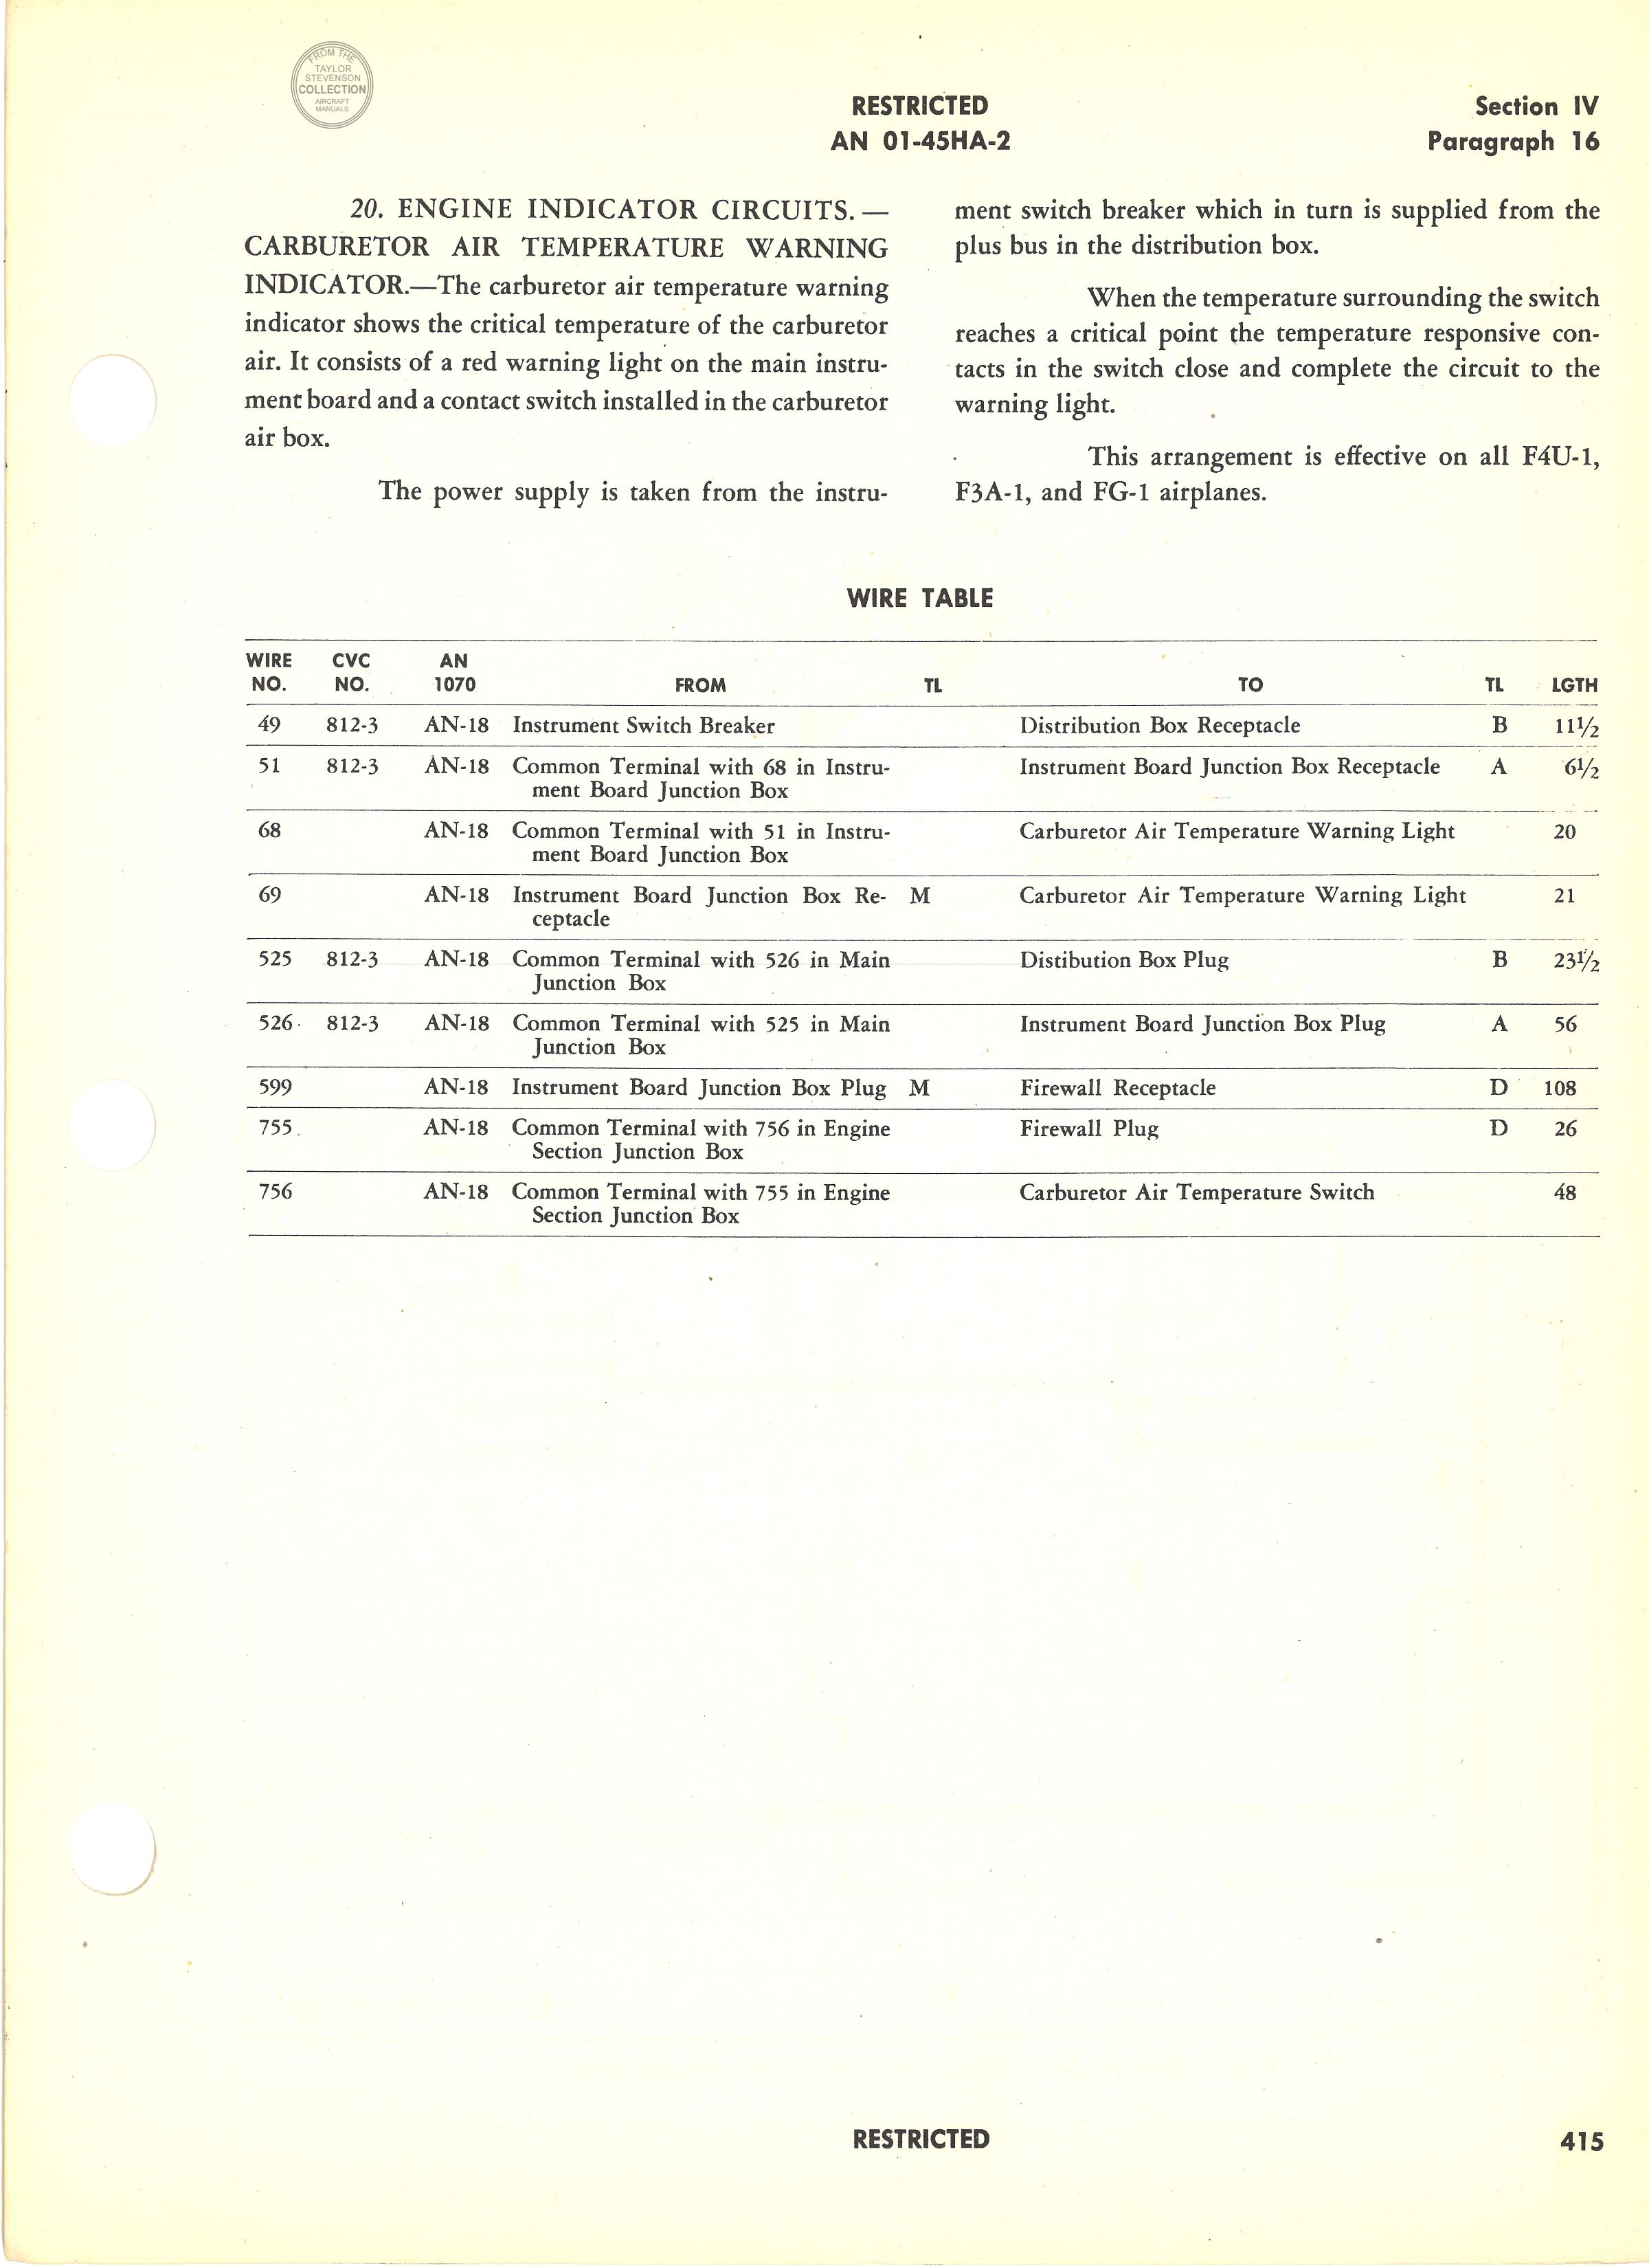 Sample page 437 from AirCorps Library document: Erection & Maintenance - F4U-1, F3A-1, FG-1